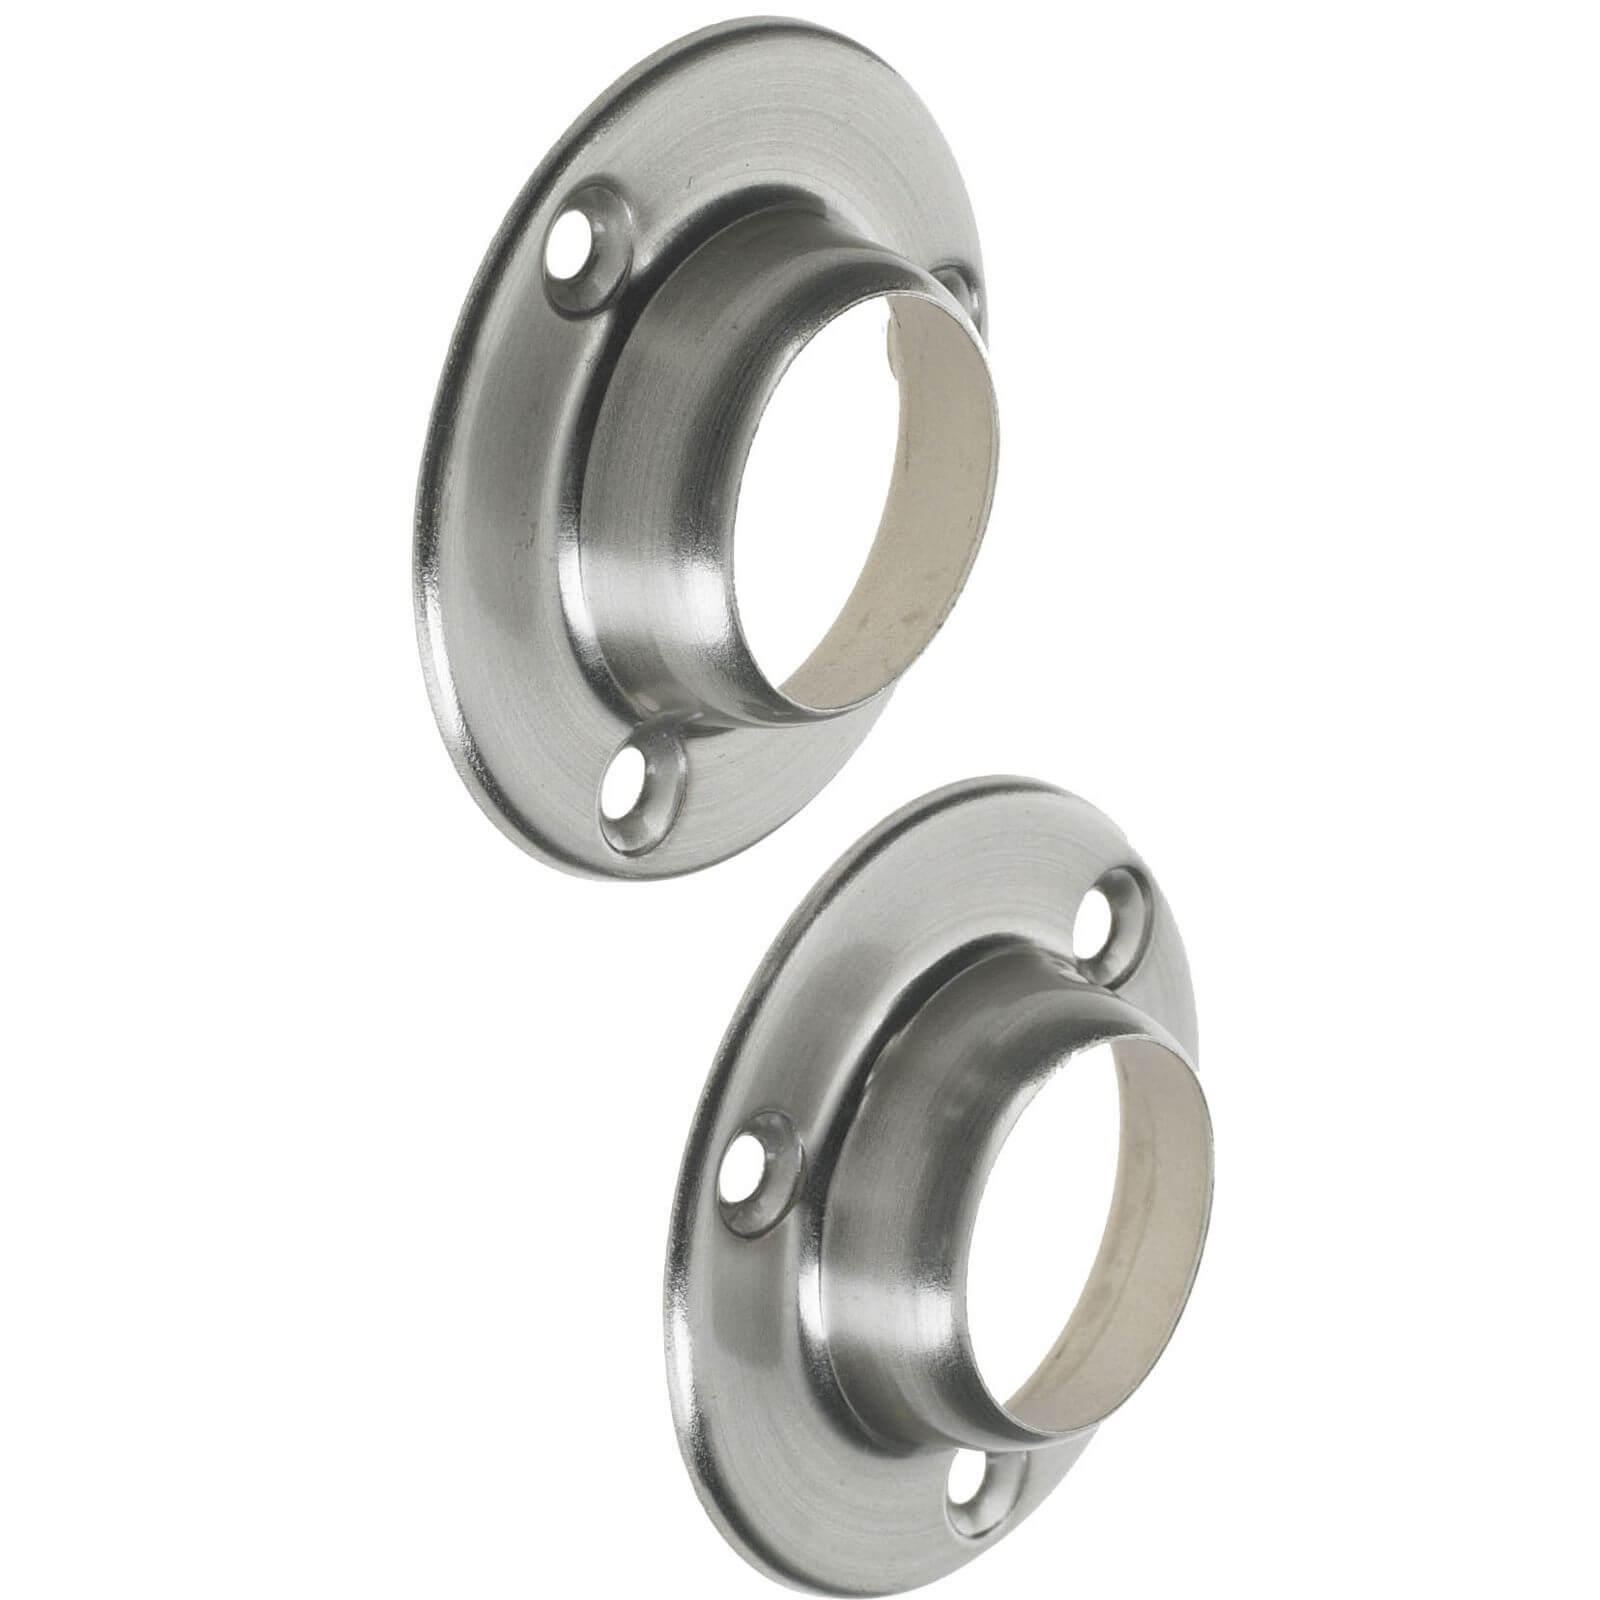 Photo of Deluxe Sockets - Brushed Nickel - 25mm